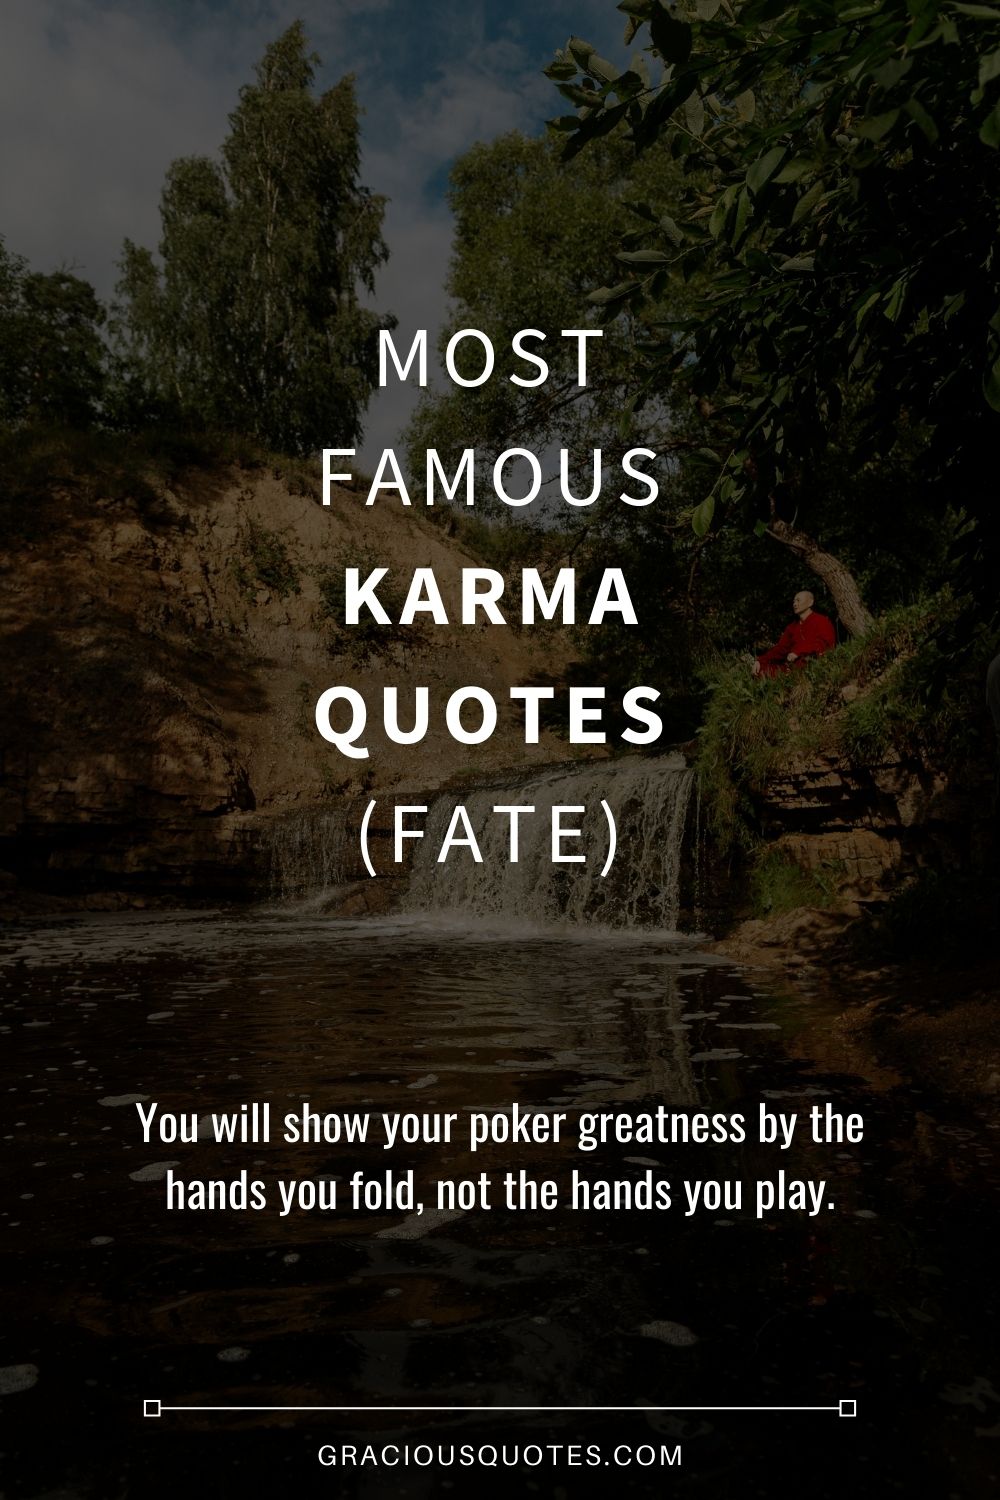 Most Famous Karma Quotes (FATE) - Gracious Quotes